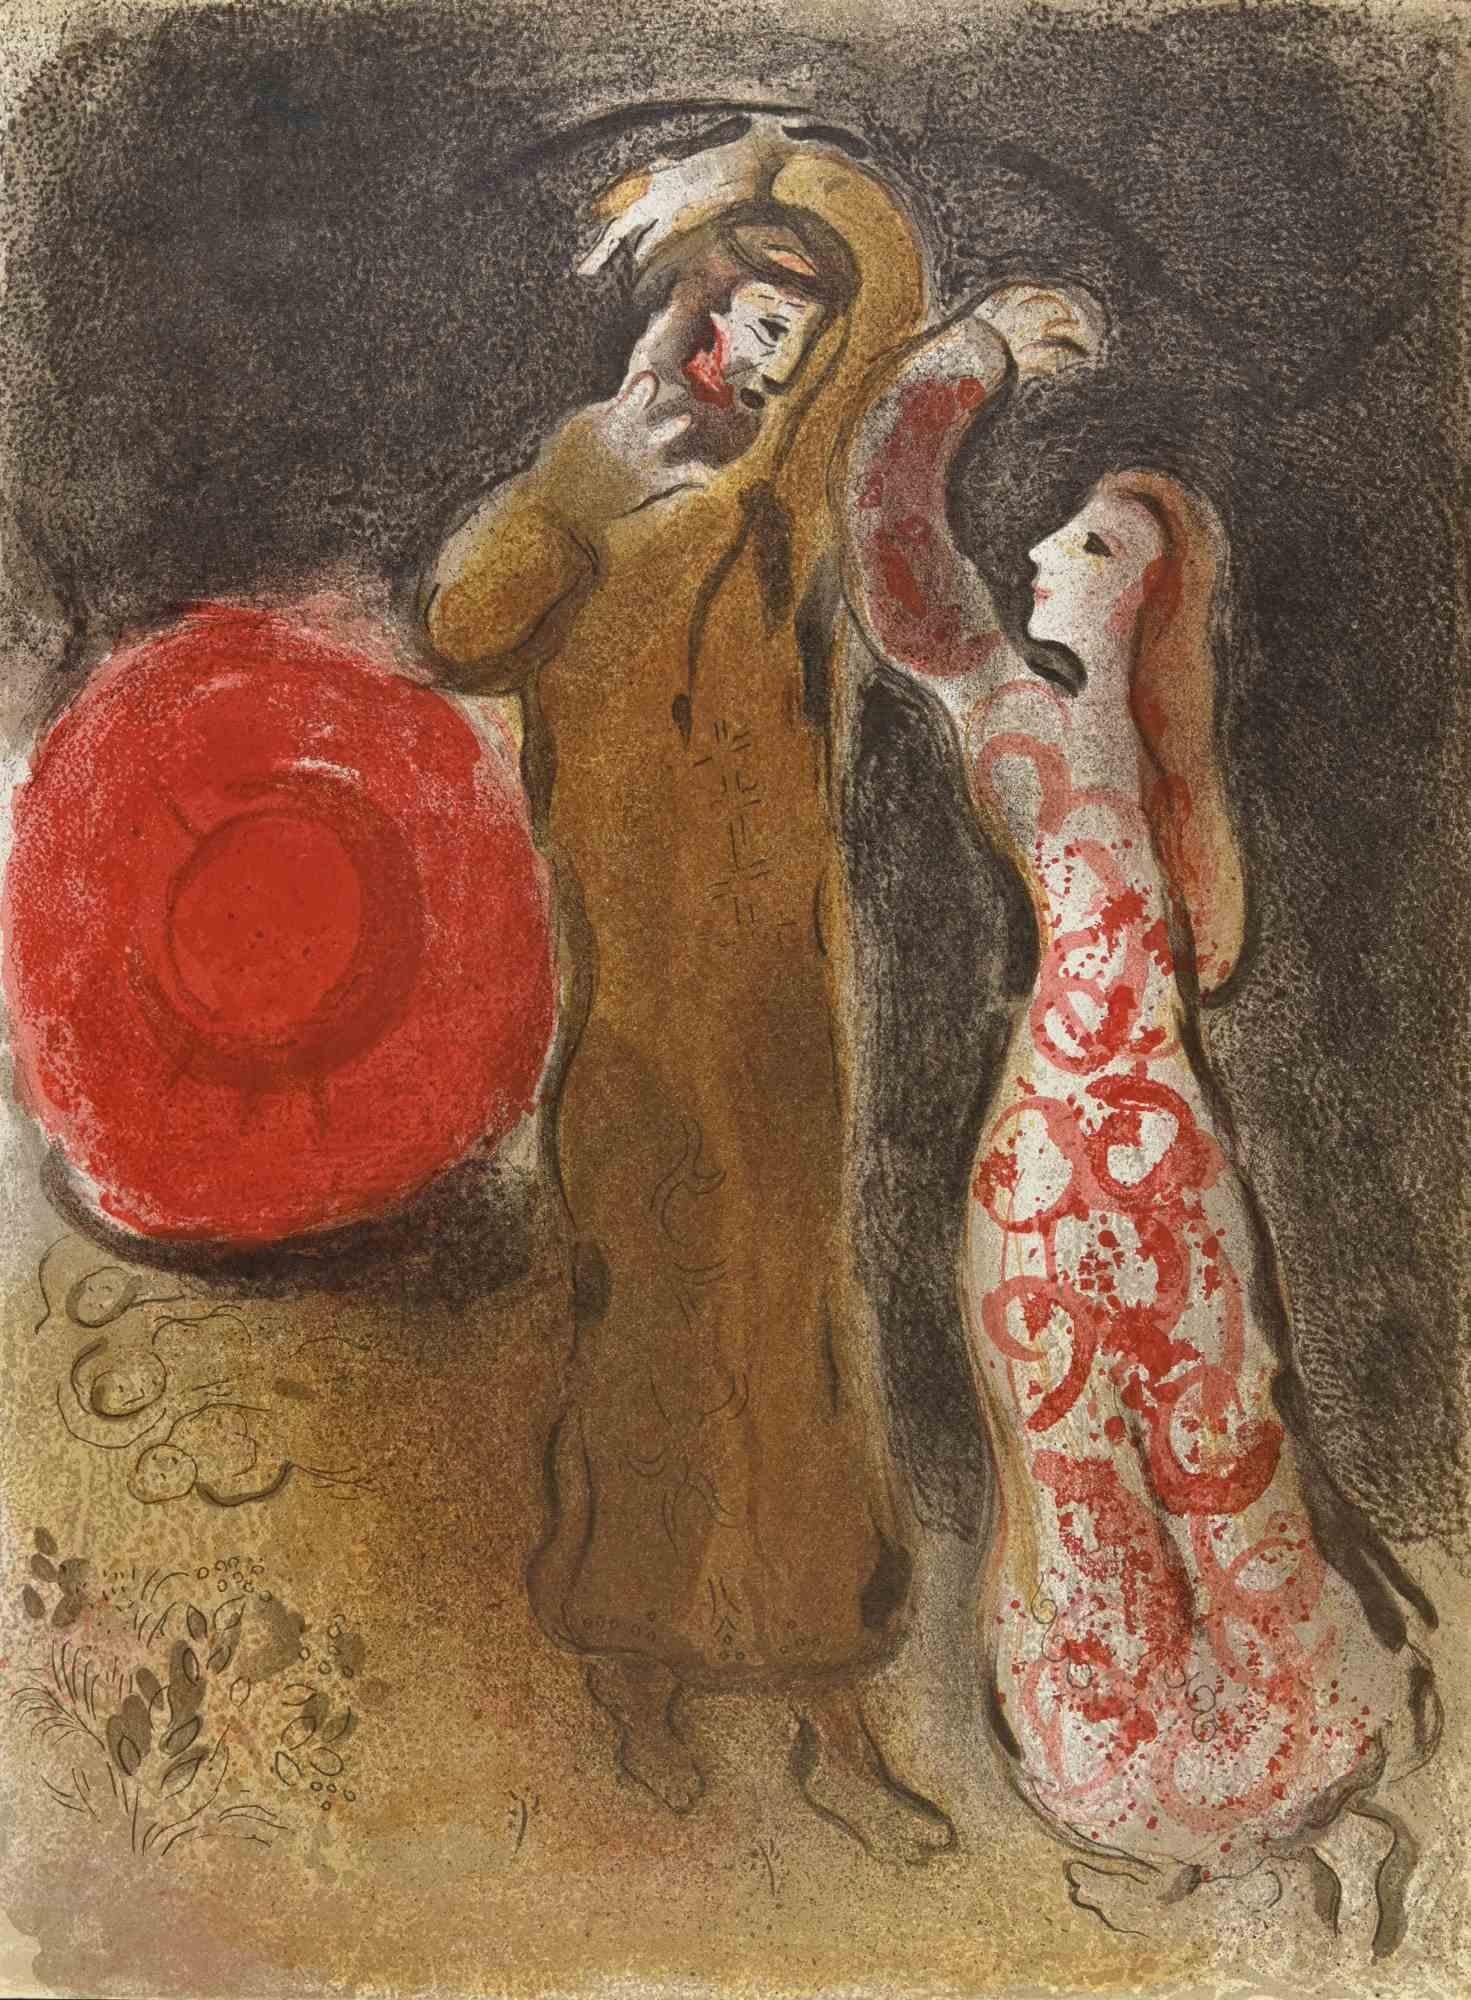 Ruth and Boaz is a an artwork from the Series "The Bible". 
"The Bible", by Marc Chagall in 1960.
Mixed colored lithograph on brown-toned paper, no signature.
Edition of 6500 unsigned lithographs. Printed by Mourlot and published by Tériade,